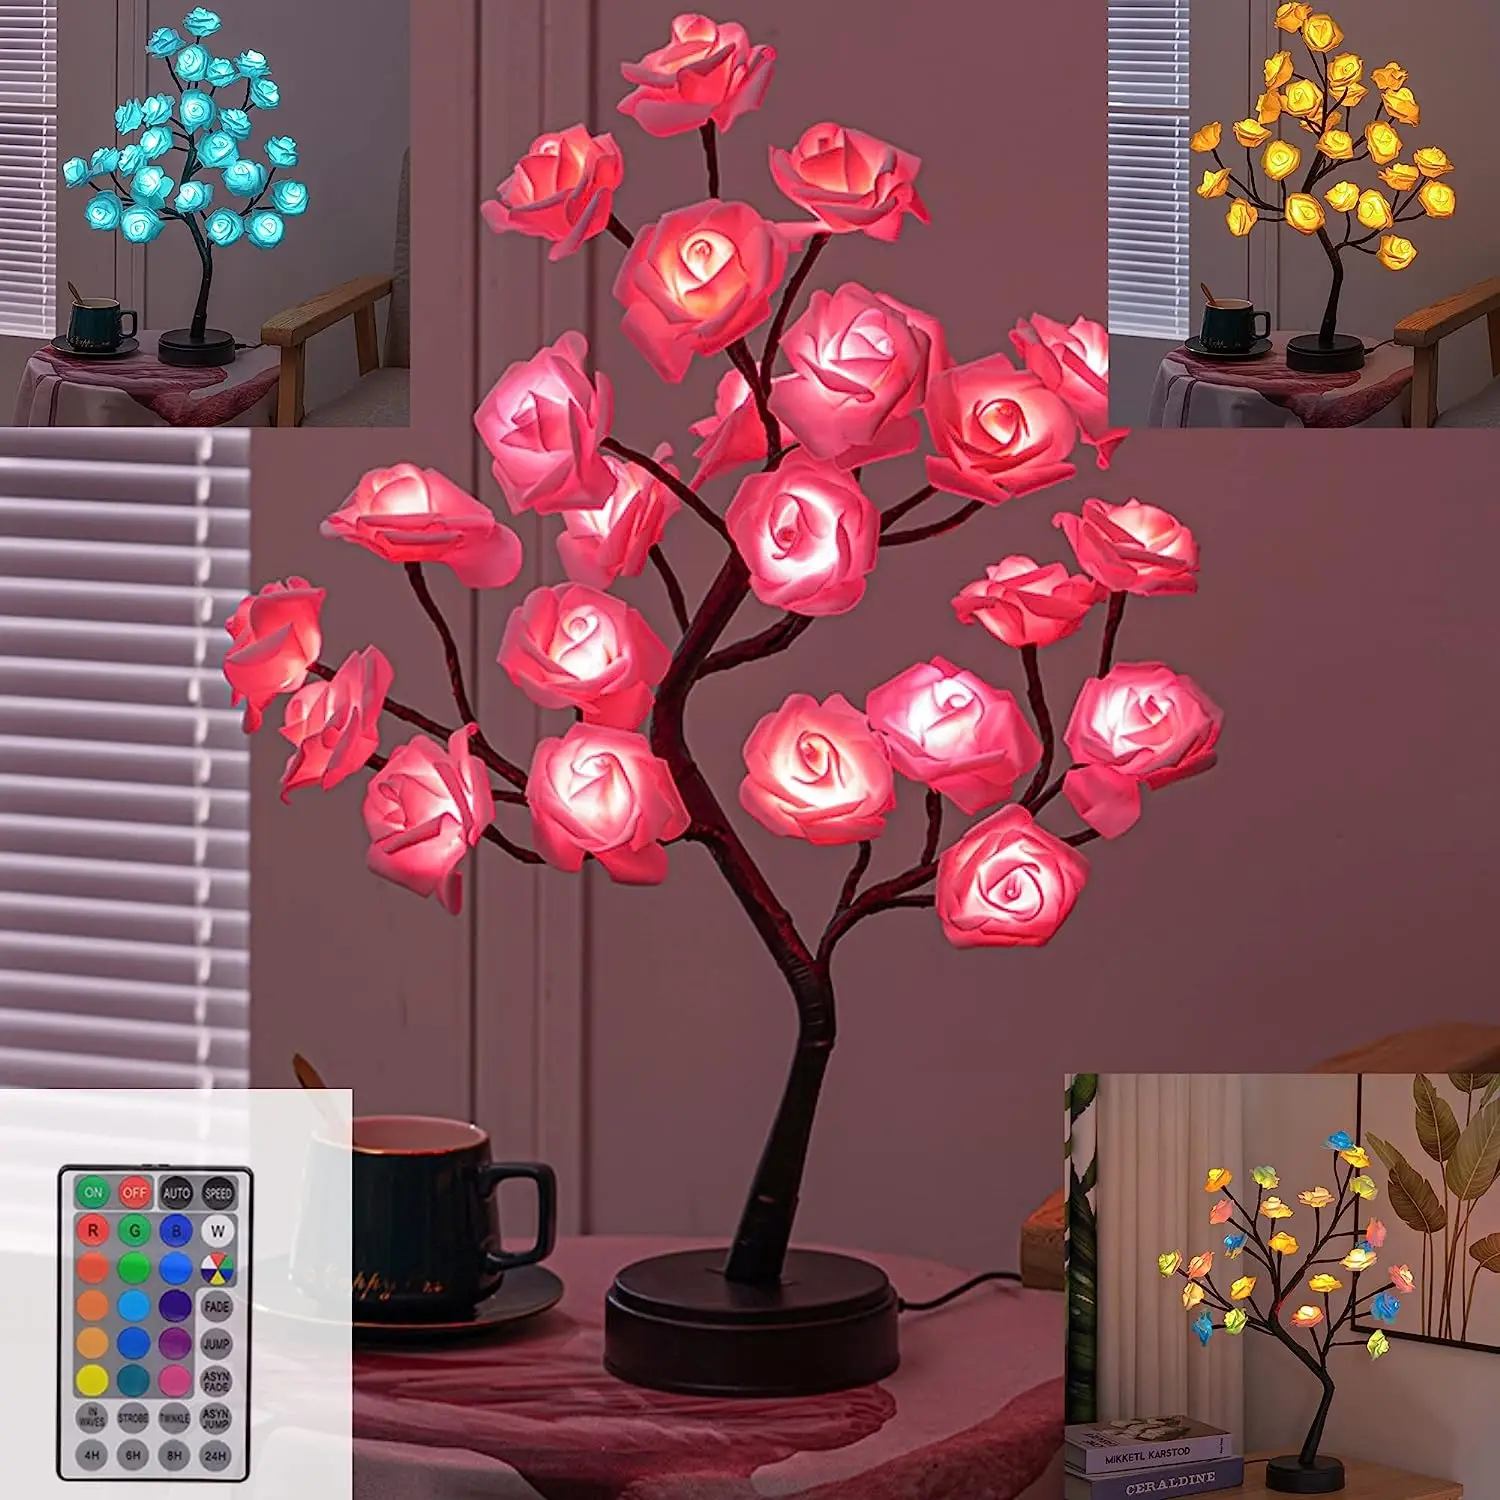 RGB Rose Flower Tree Lights 24LED USB Battery Table Lamp Fairy Night Light Home Party Christmas Wedding Bedroom Decoration Gift 2021 new led table lamp rose flower tree usb night lights christmas gift for kids room rose flower lighting home decoration